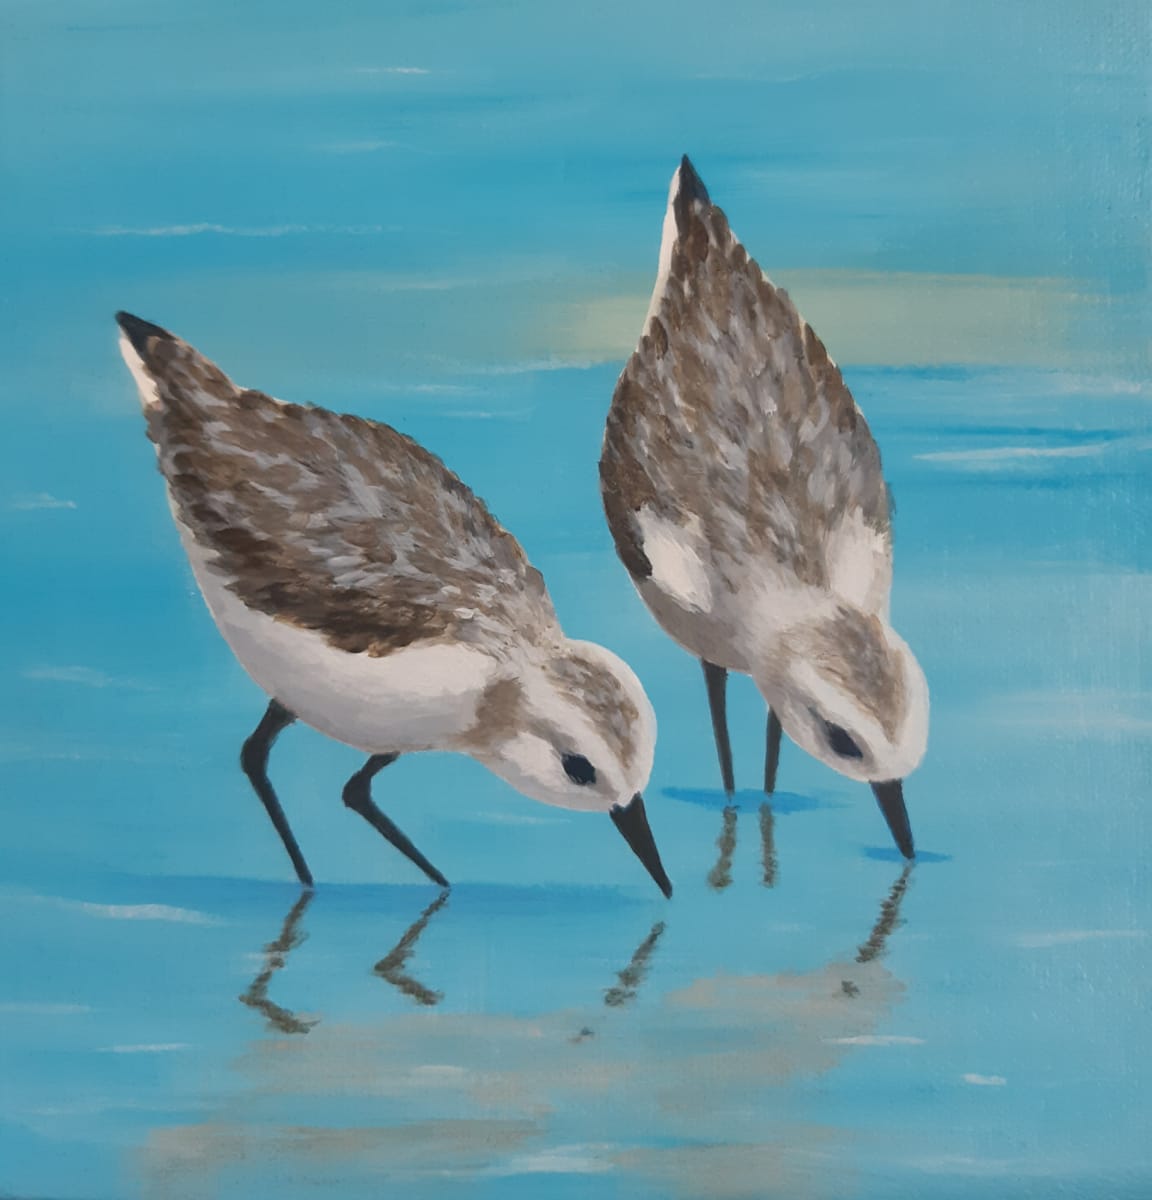 Two of a Kind by Jane Thuss  Image: Two Sanderlings look at their reflections as they search for food along the shore.